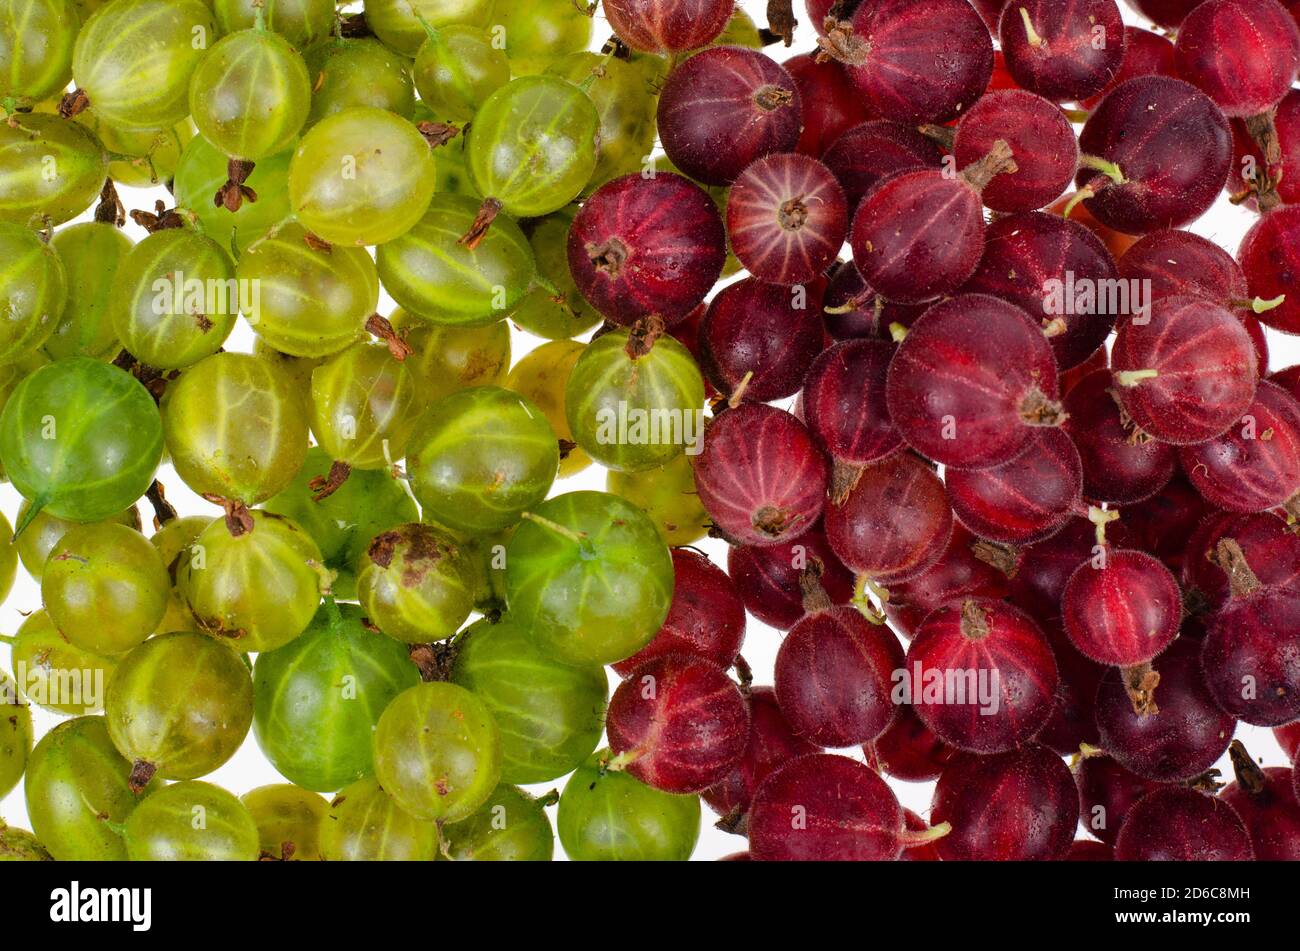 Mobile wallpaper: Gooseberry, Berry, Food, Leaves, Raspberry, 94019  download the picture for free.